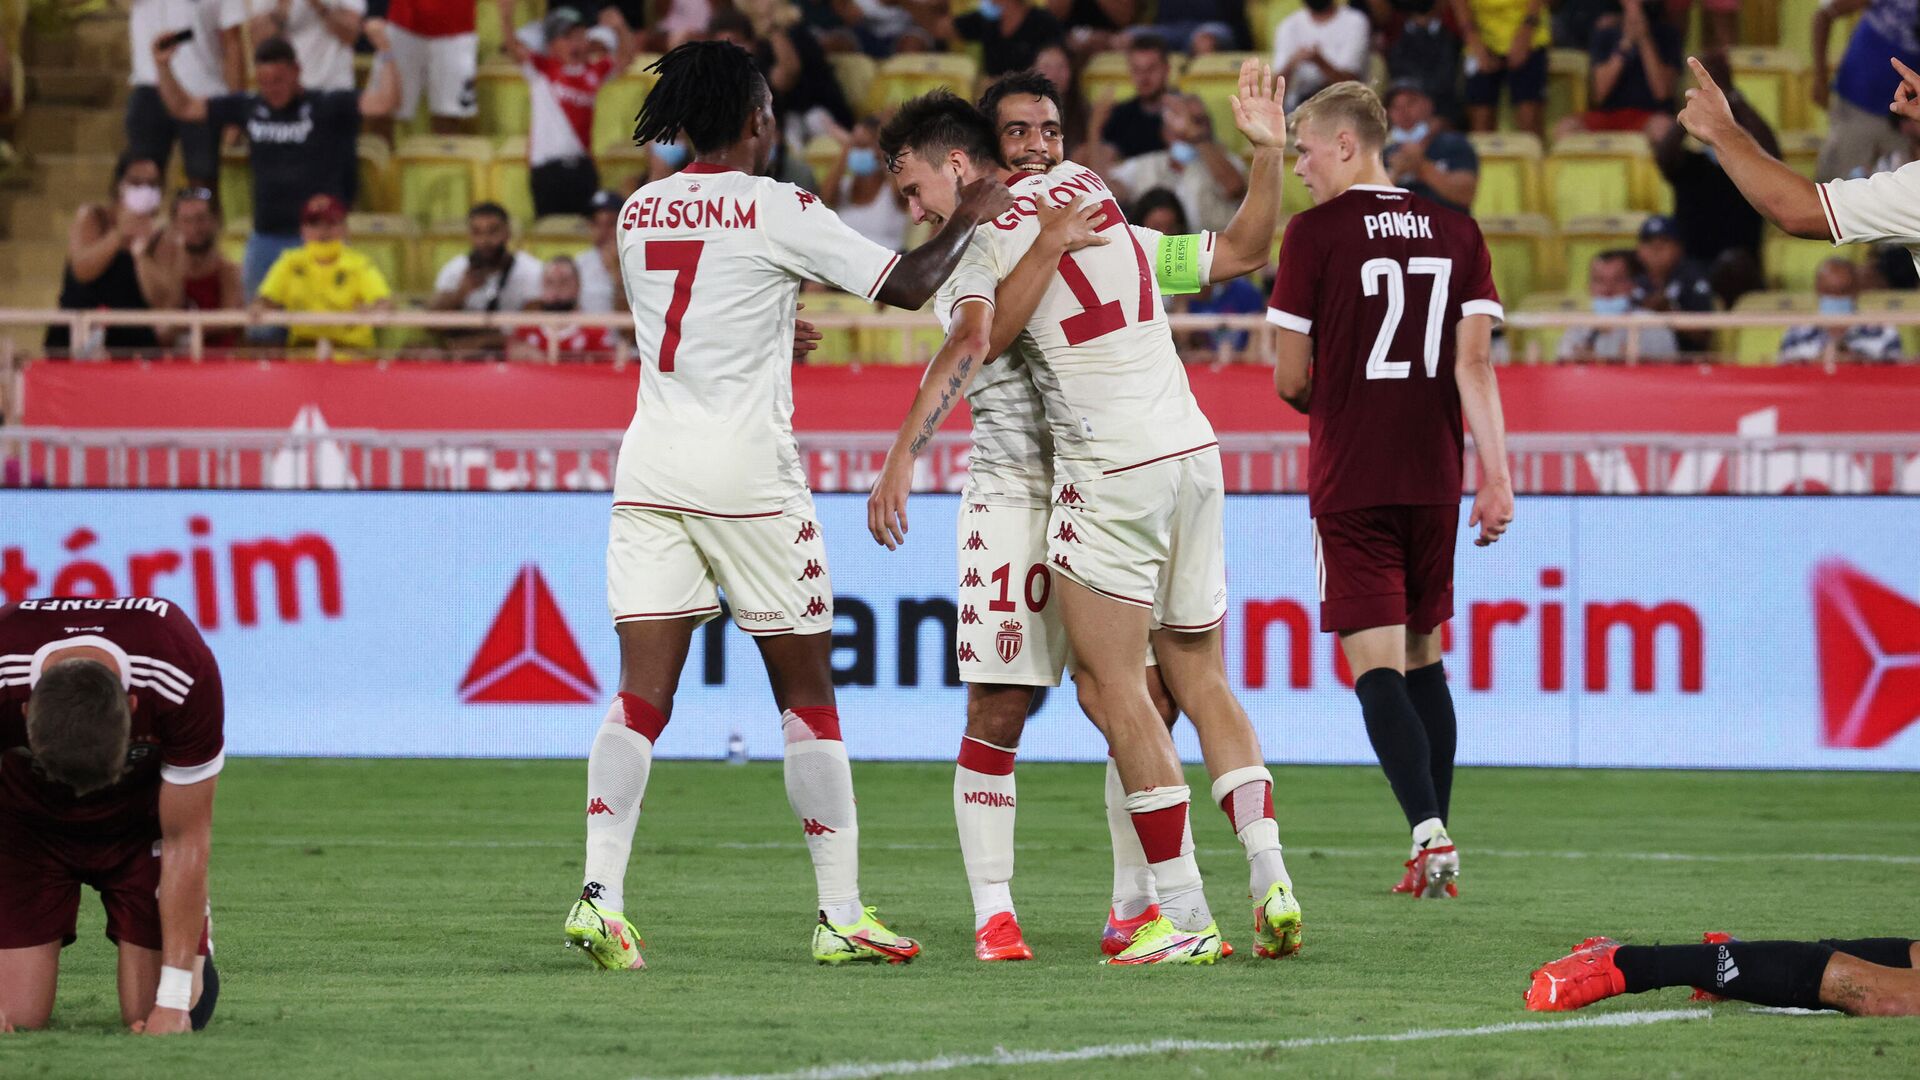 Monaco's Russian midfielder Aleksandr Golovin (C) celebrates with teammates after he scored a second goal during the Champions League match Q3 football match between AS Monaco and AC Sparta Praha at Louis II stadium in Monaco, on August 10, 2021. (Photo by Valery HACHE / AFP) - РИА Новости, 1920, 10.08.2021